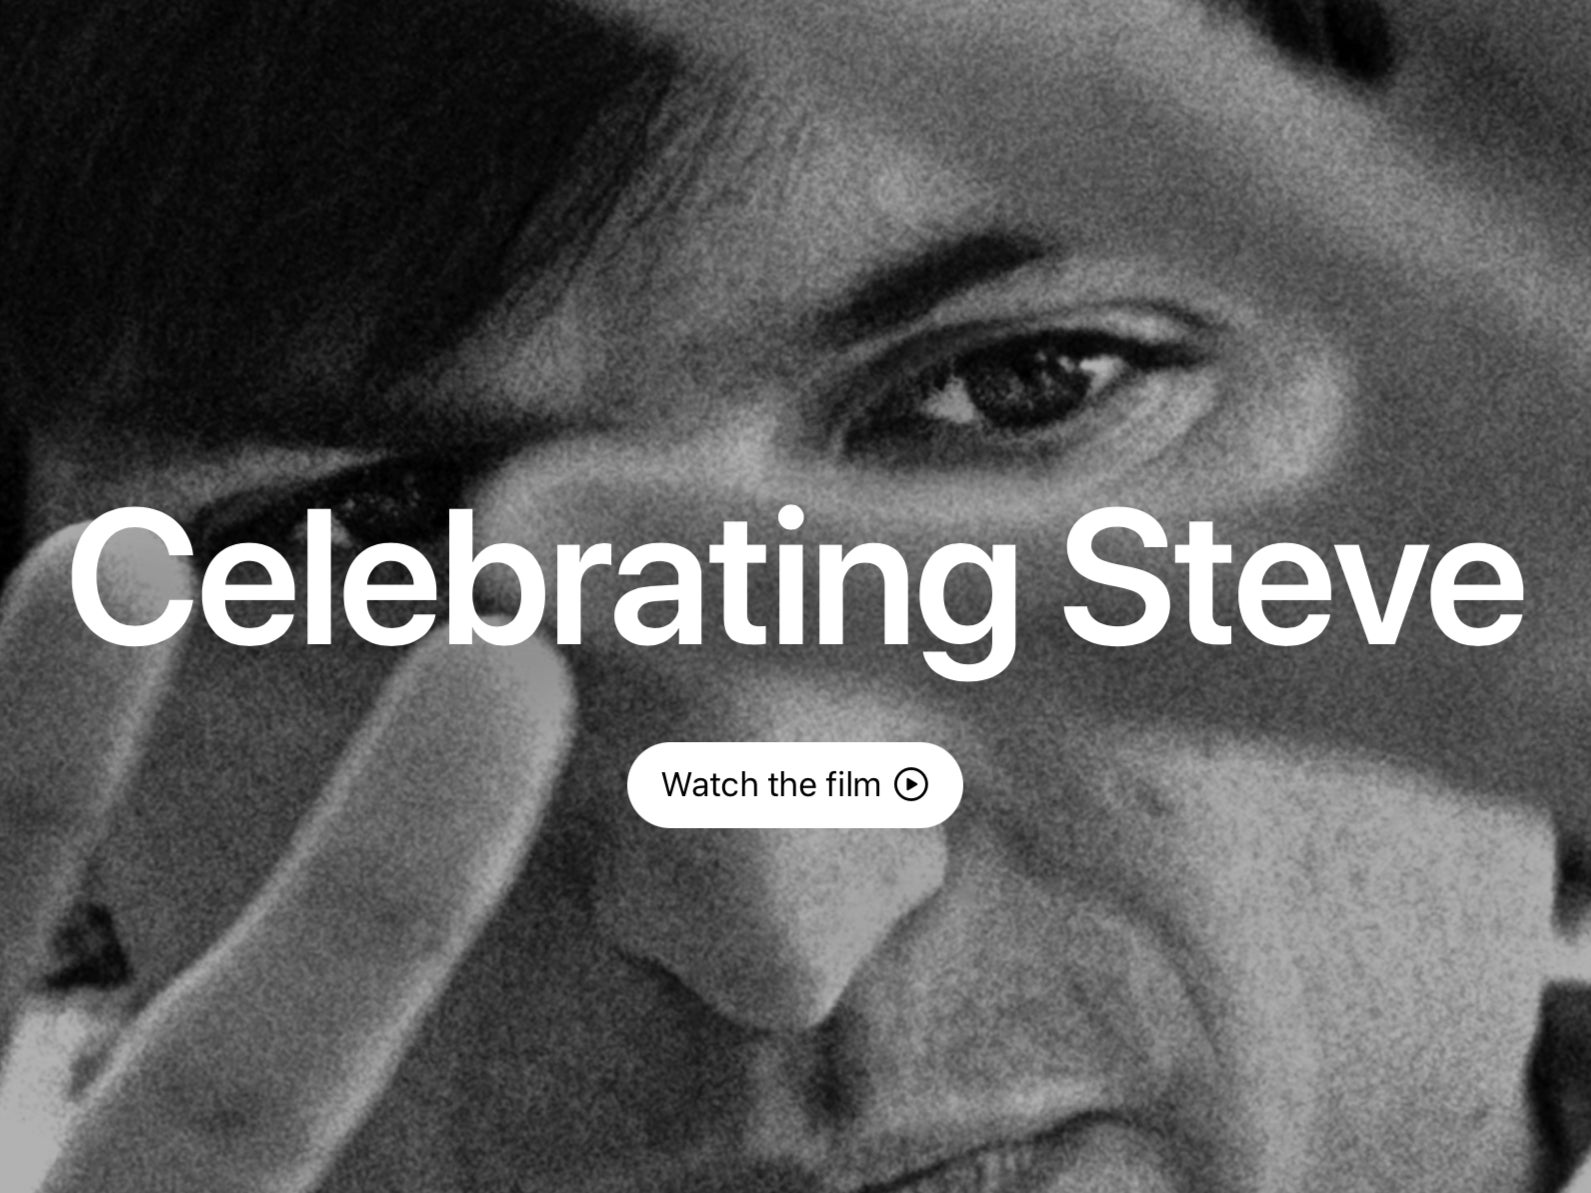 Apple pays touching homepage tribute to Steve Jobs on 10th anniversary of his death